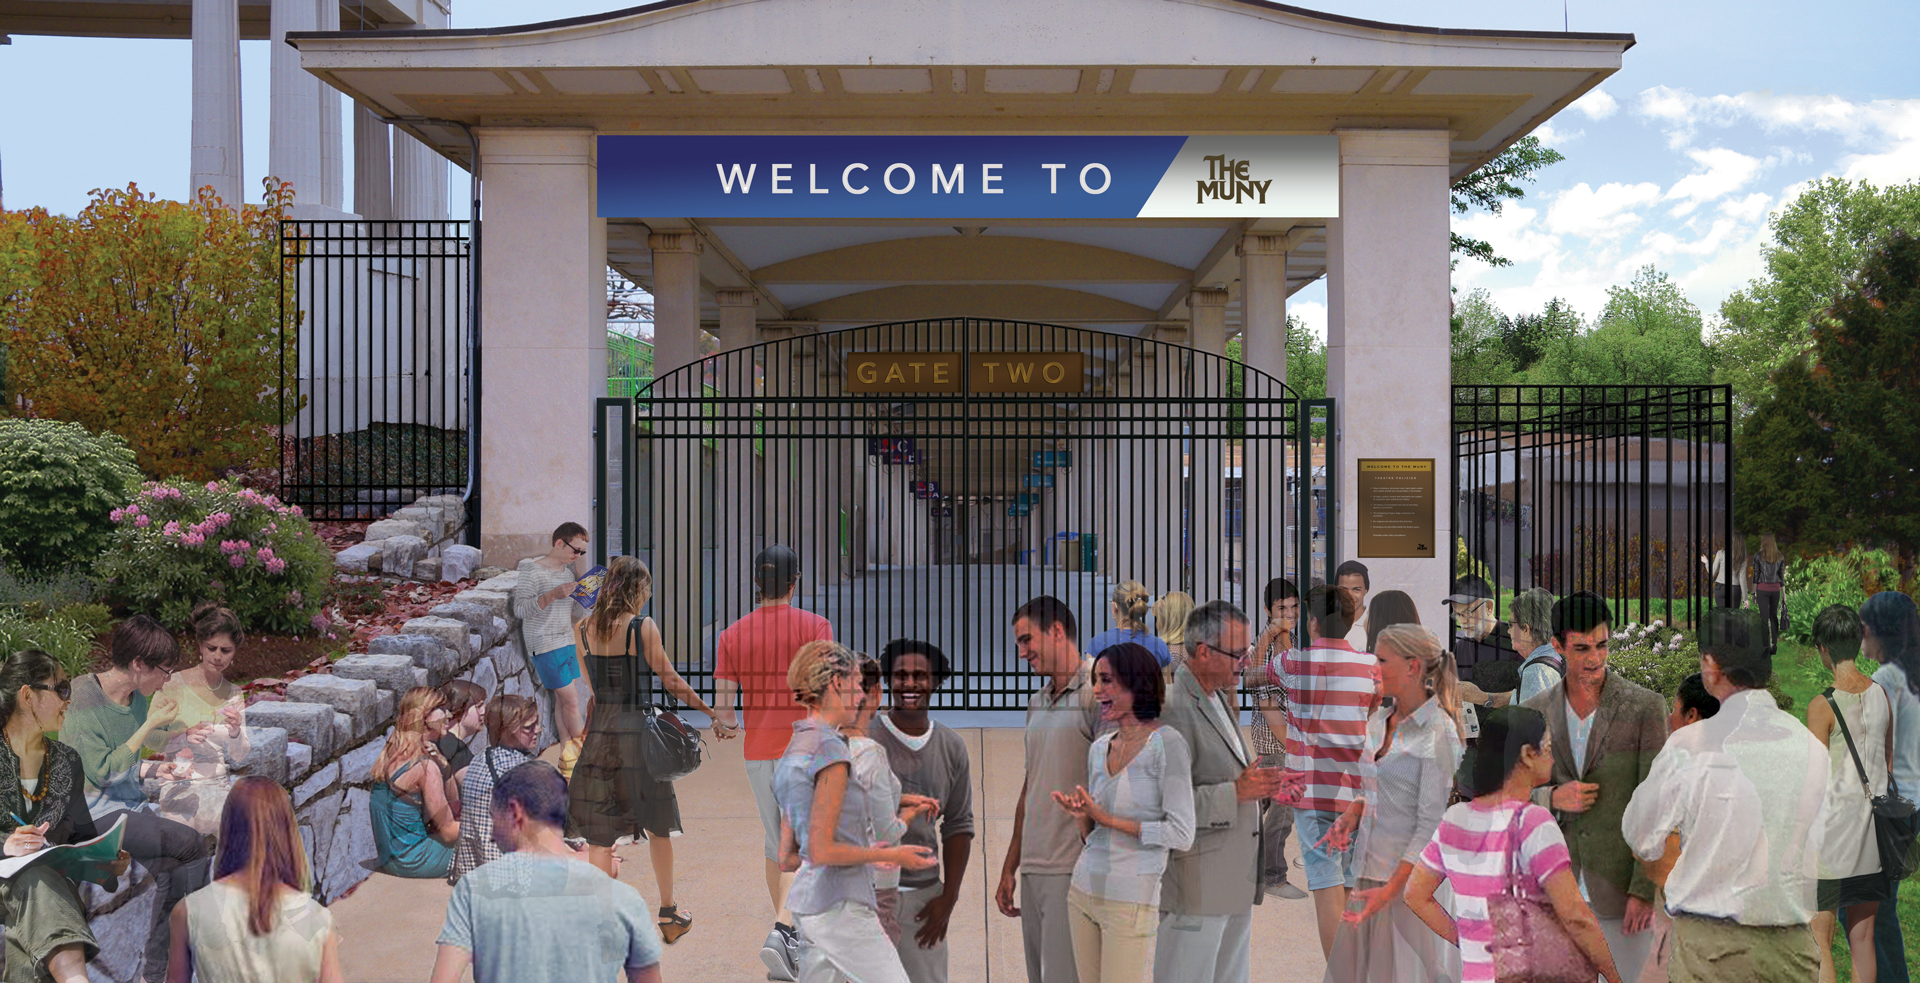 A photo of the Muny gate as a demonstration of infrastructure improvements